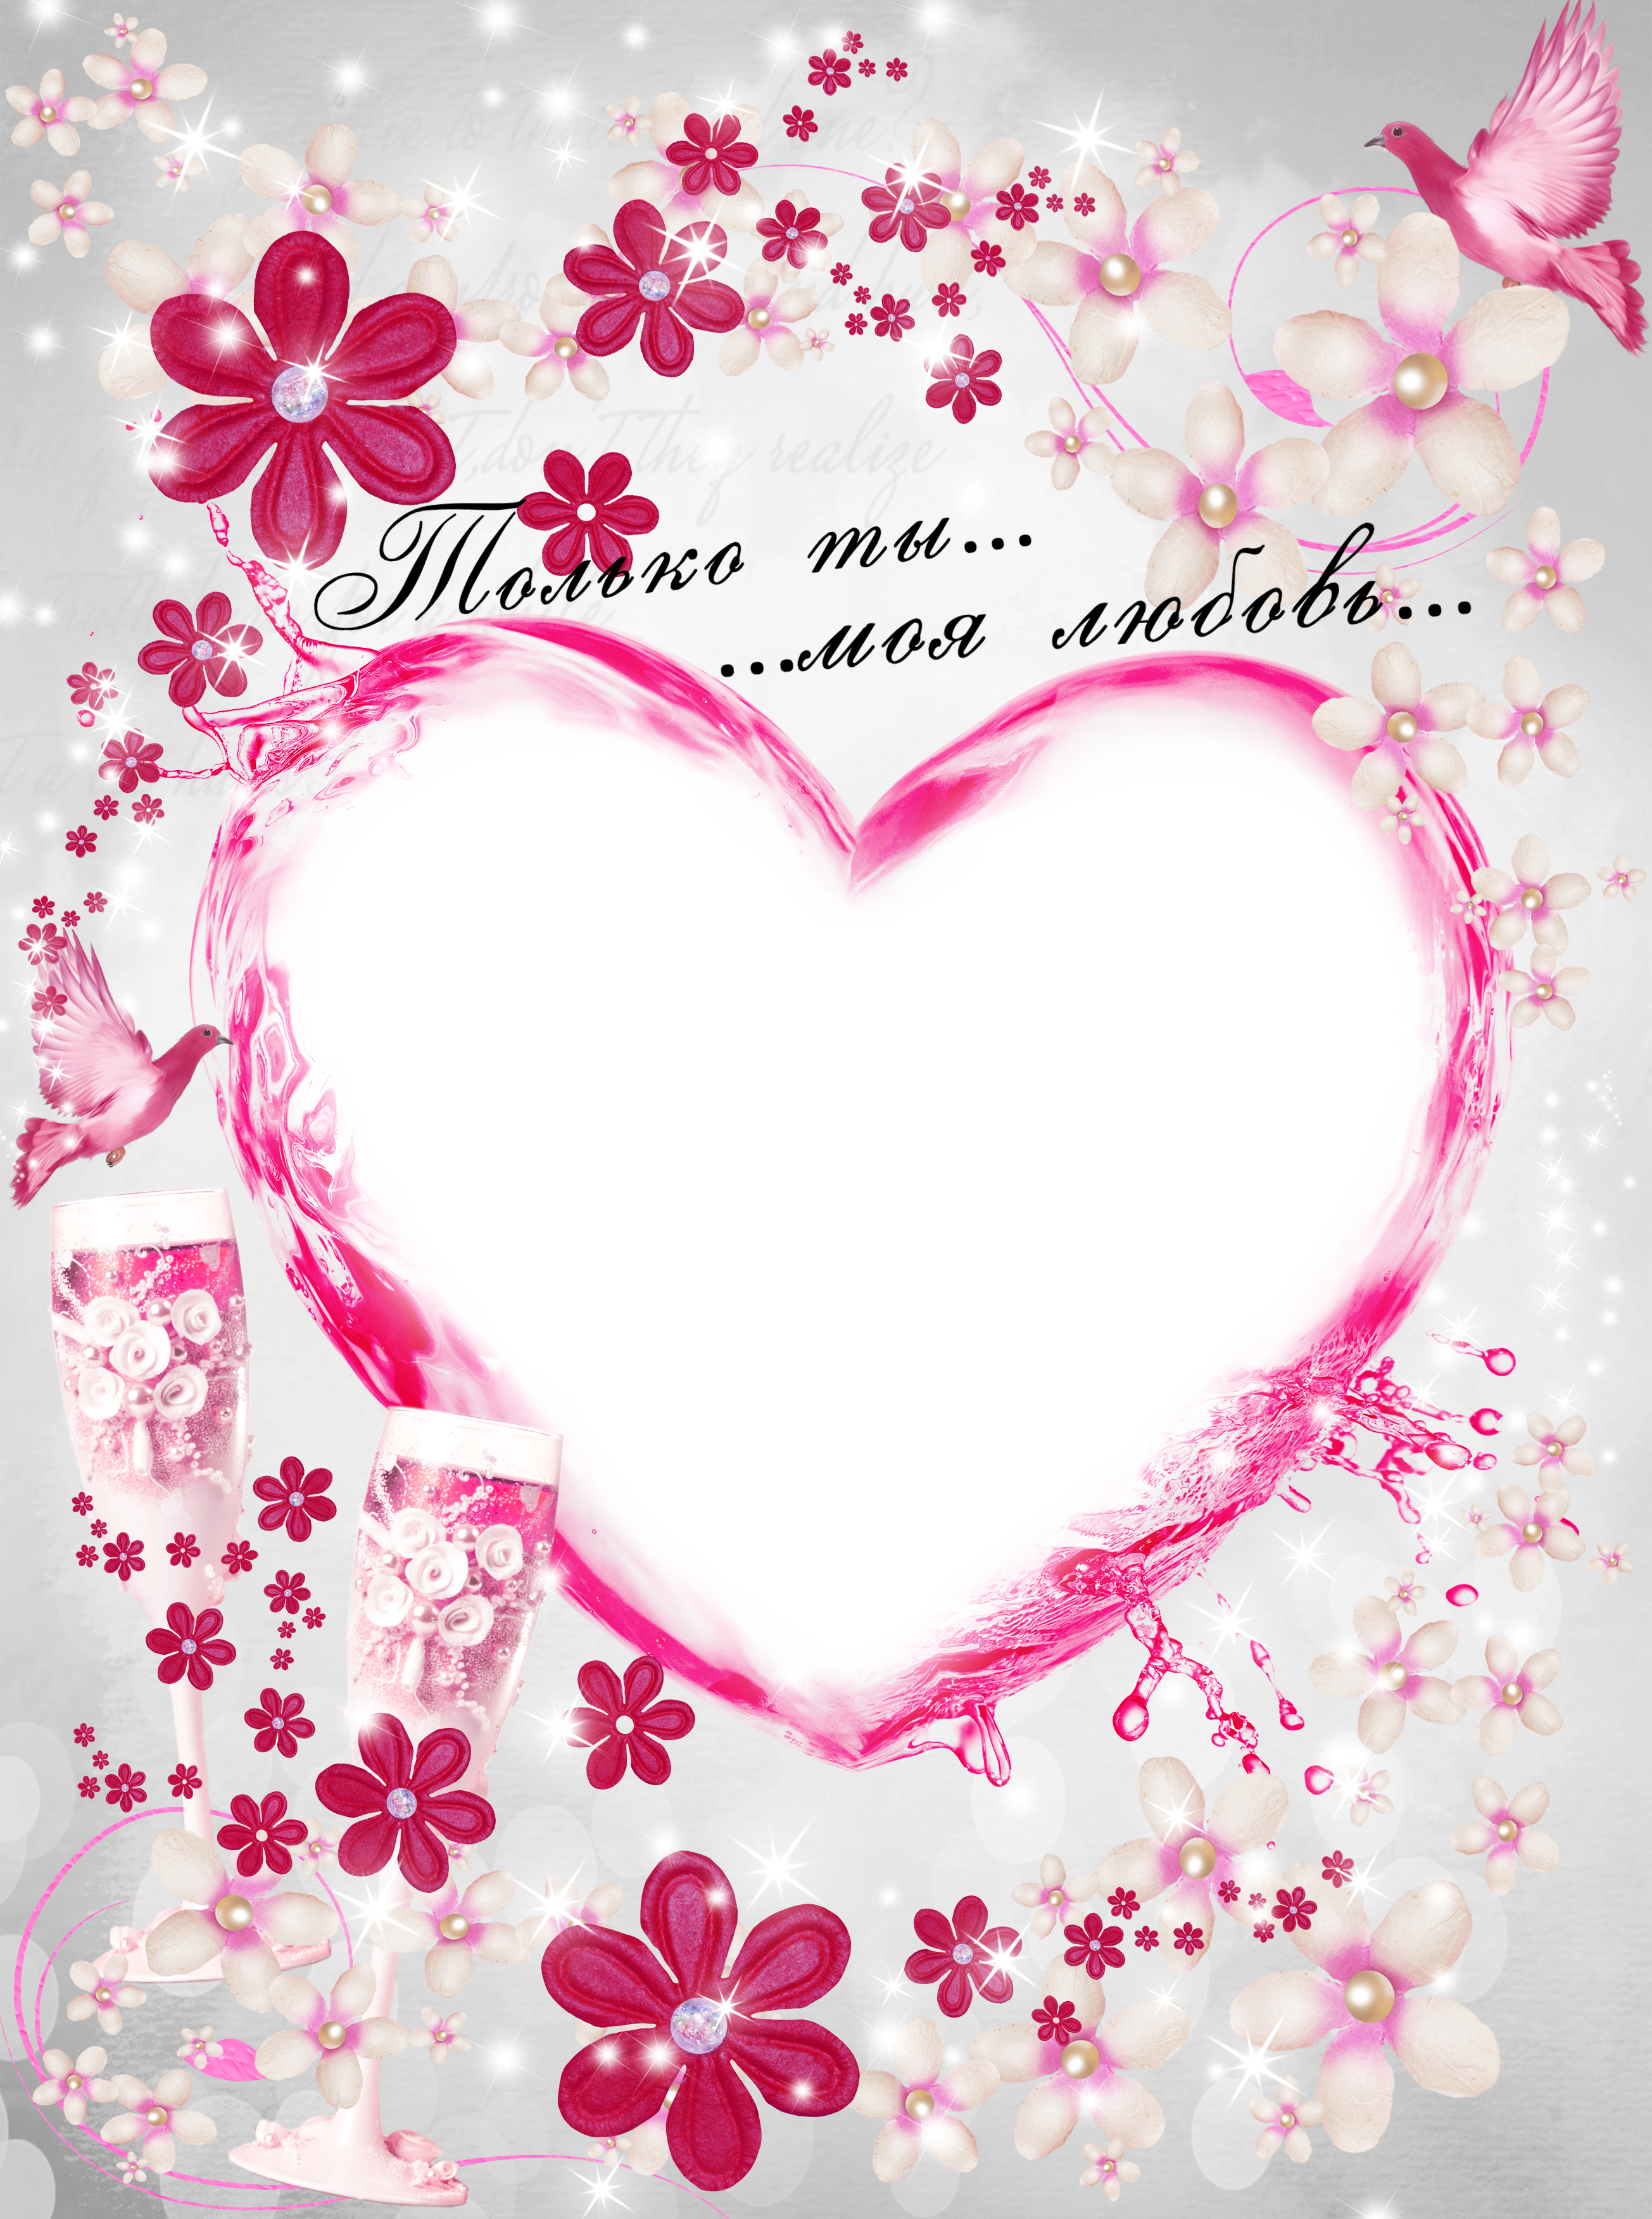 Heart Frame Heart-Shaped Picture Free Transparent Image HQ PNG Image